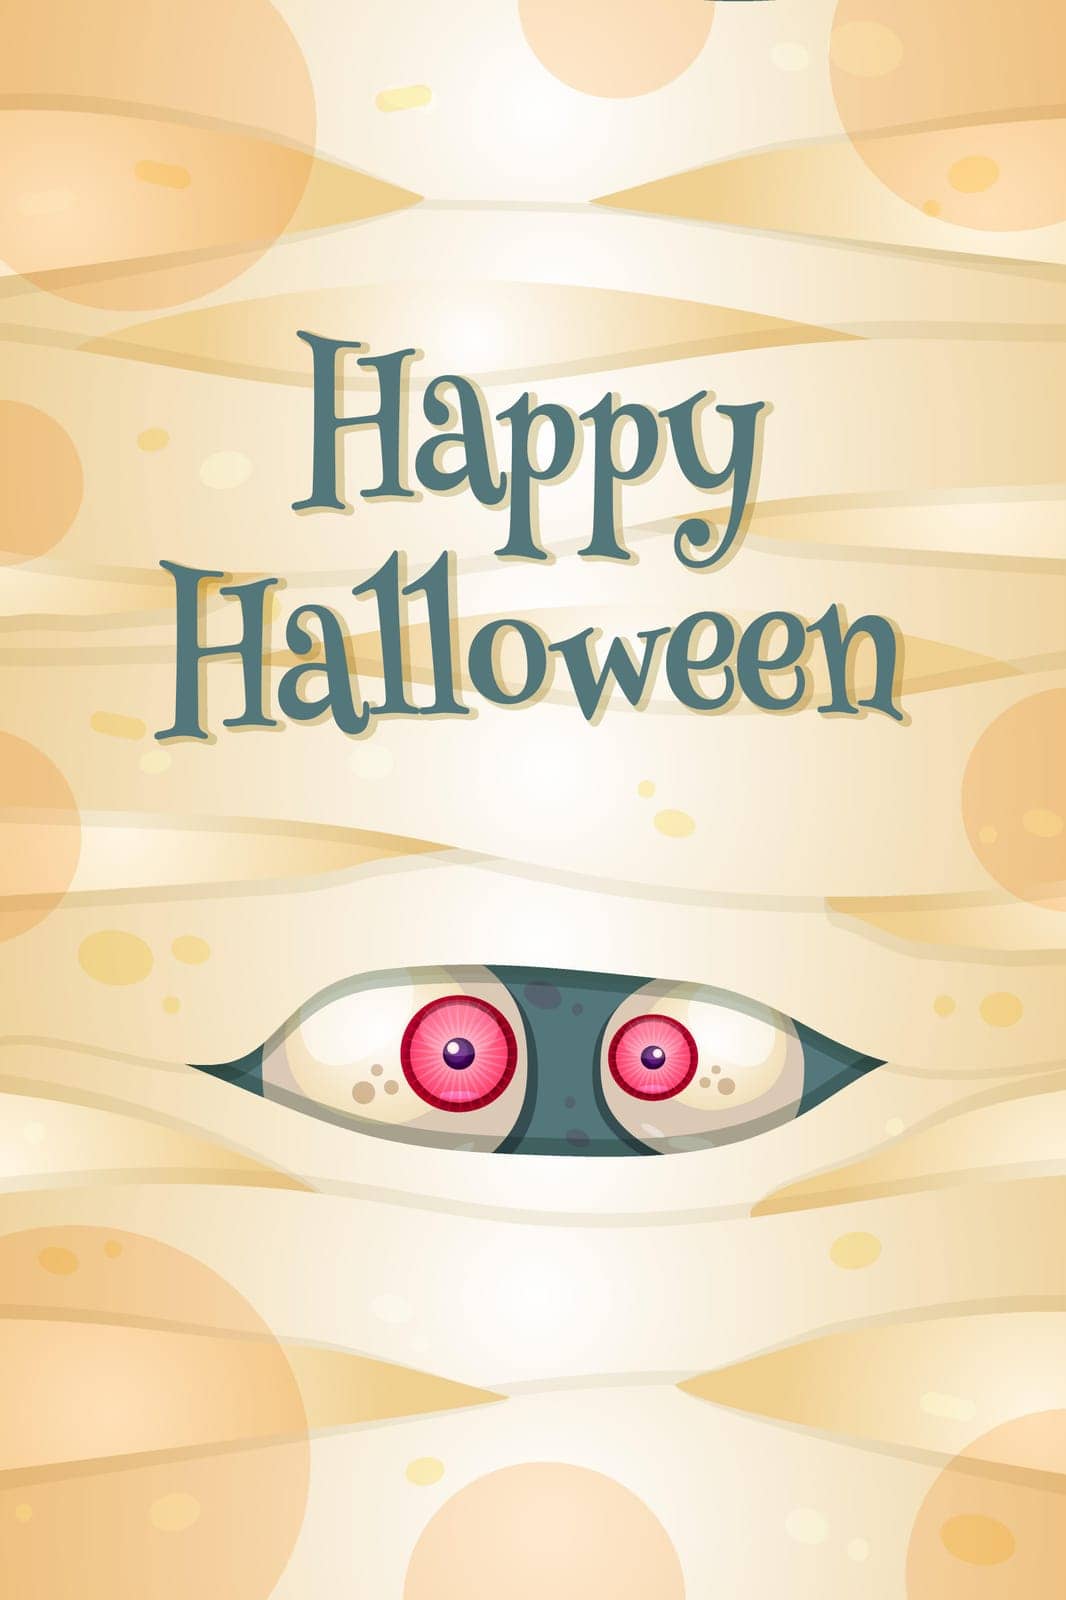 Happy Halloween greeting card vector template by barsrsind